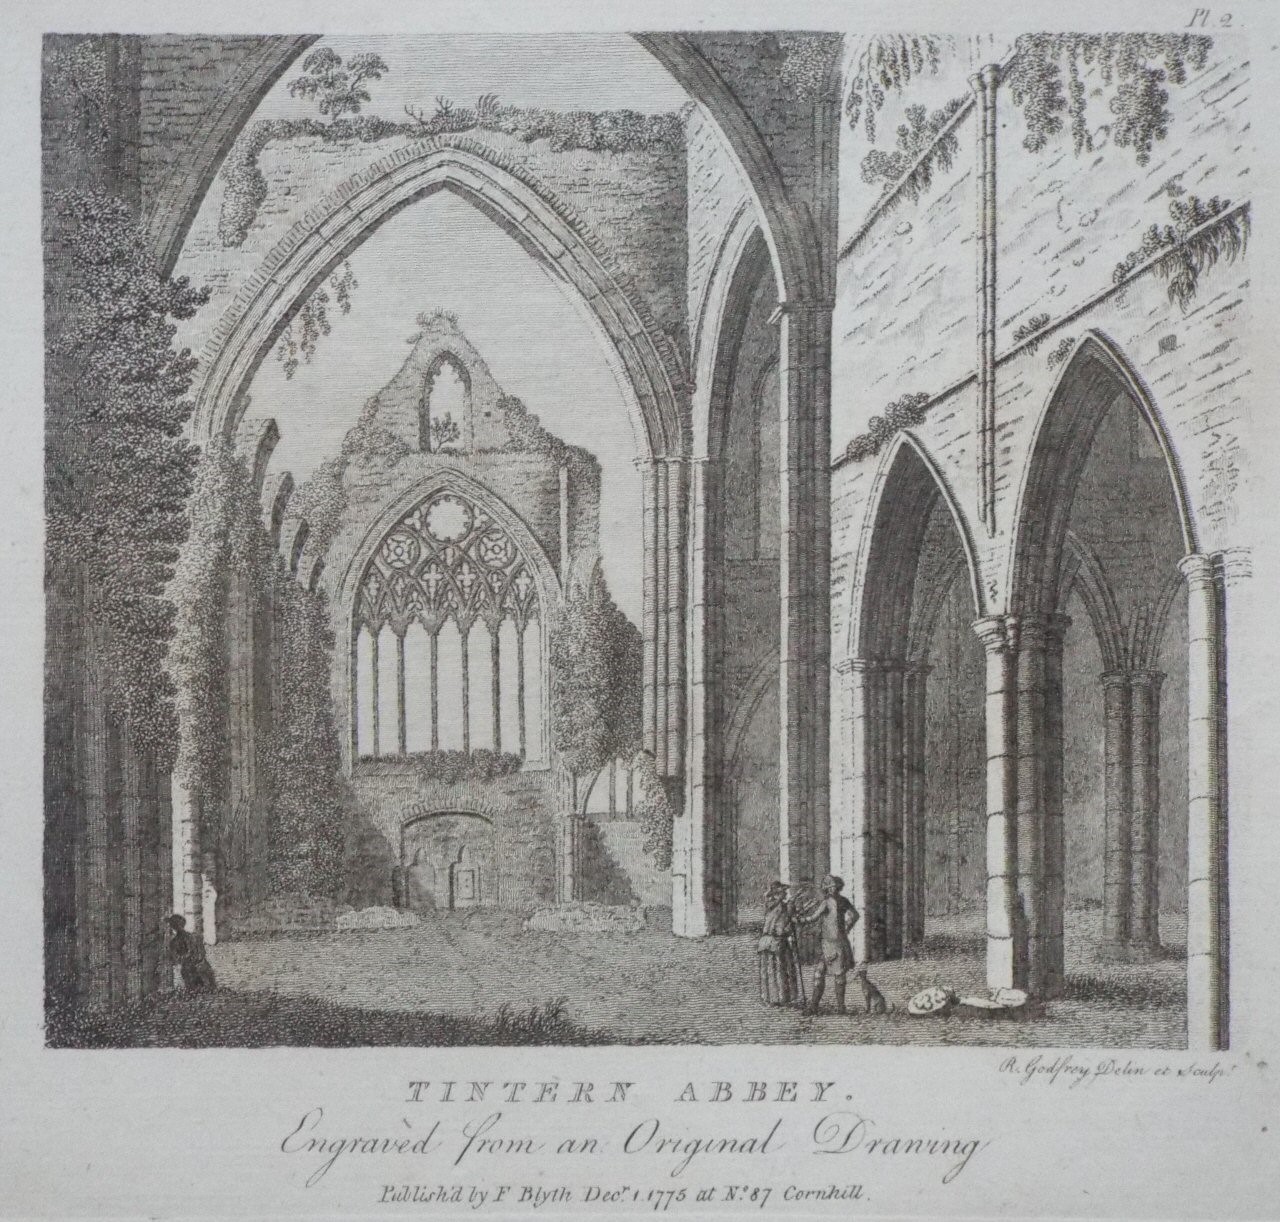 Print - Tintern Abbey, Engraved from an Original Drawing - Godfrey